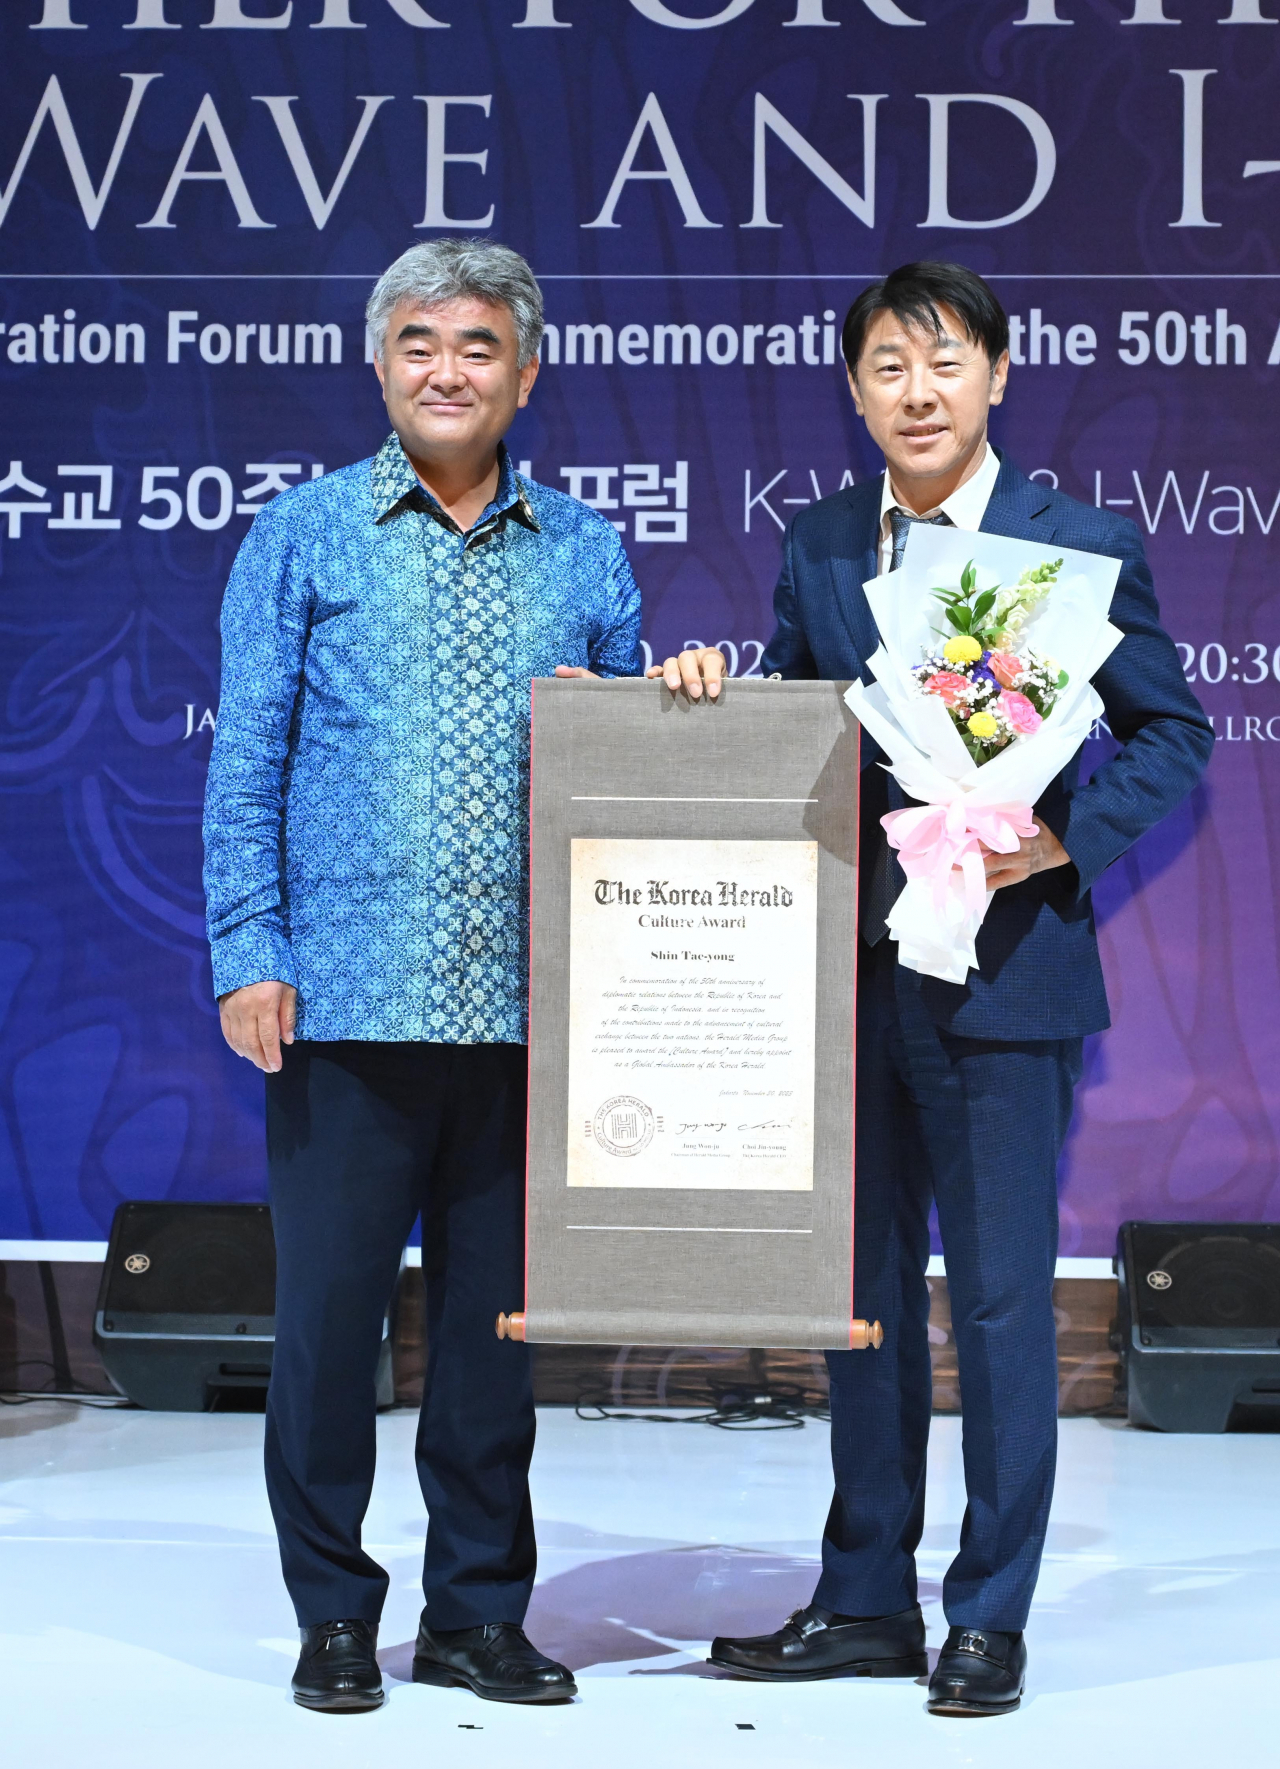 Daewoo Engineering & Construction Chairman Jung Won-ju (left) and Shin Tae-yong, manager of Indonesia's national football team, pose for a photo after Shin was honored with certificates of appreciation at the 